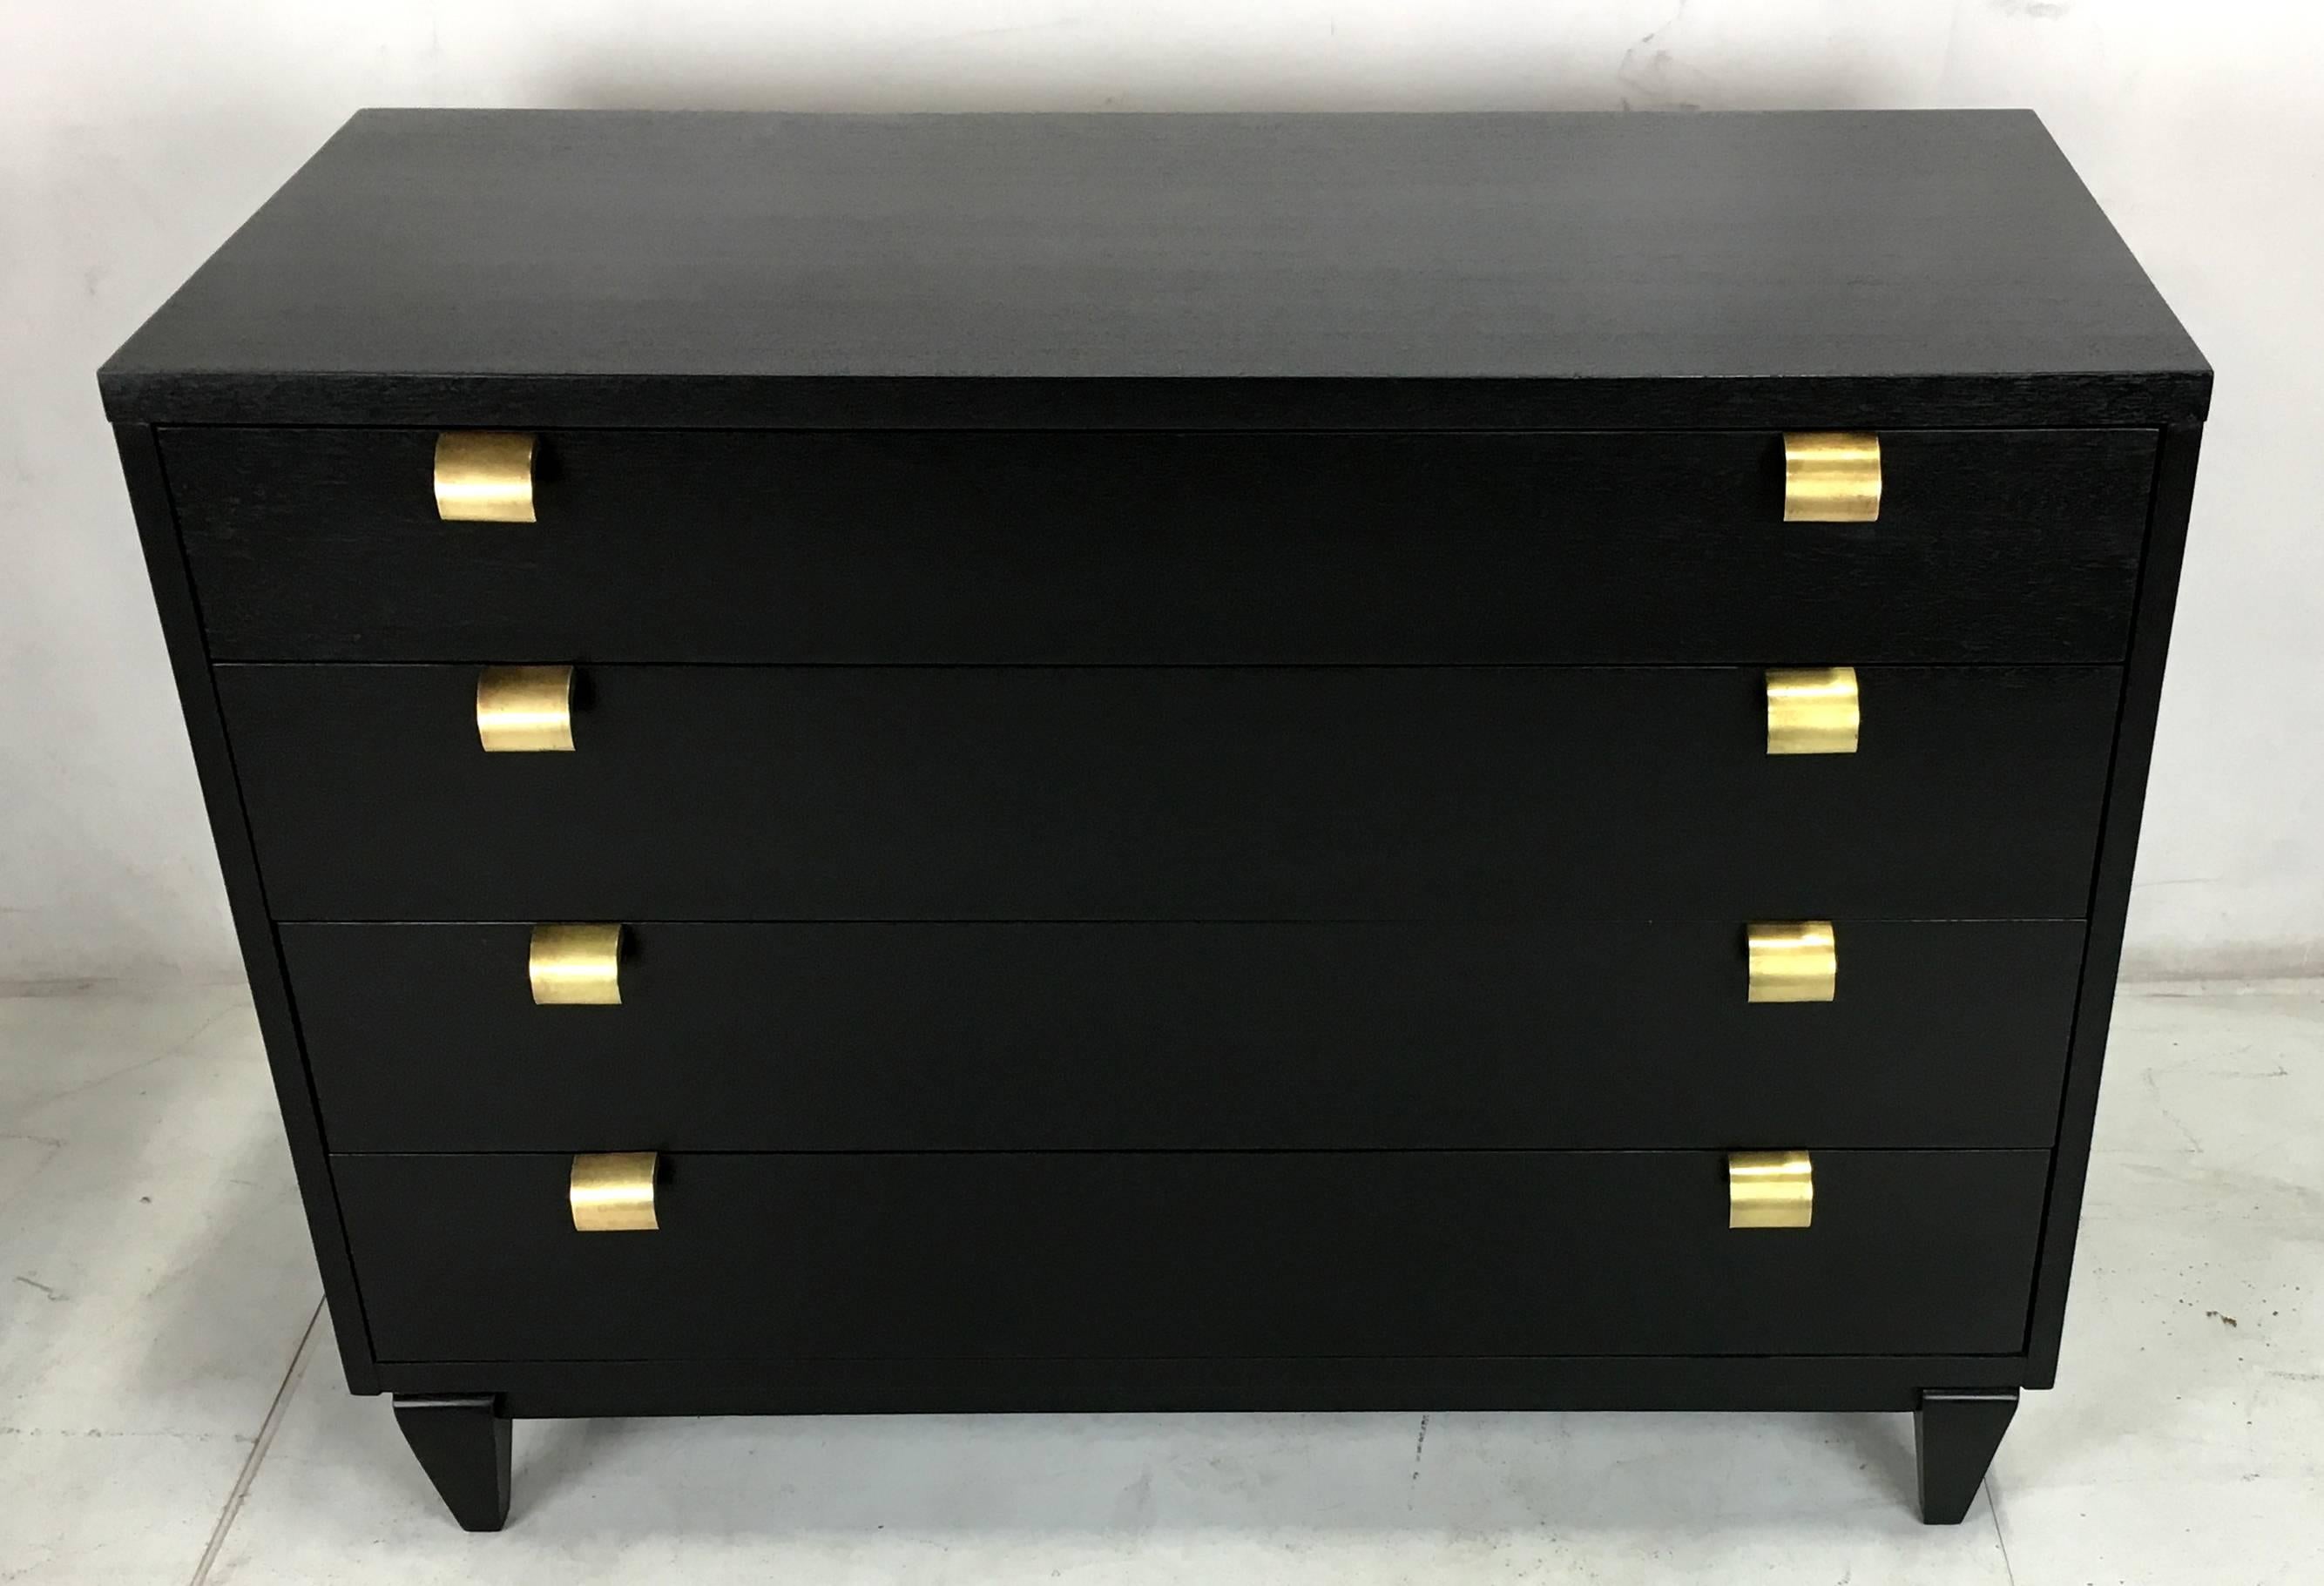 Handsome and large-scale bachelors chest by Merton Gershon for American of Martinsville meticulously refinished in open-grain ebony lacquer. The mahogany dresser can be used as a low chest or with the accessory Skyscraper style top piece, which